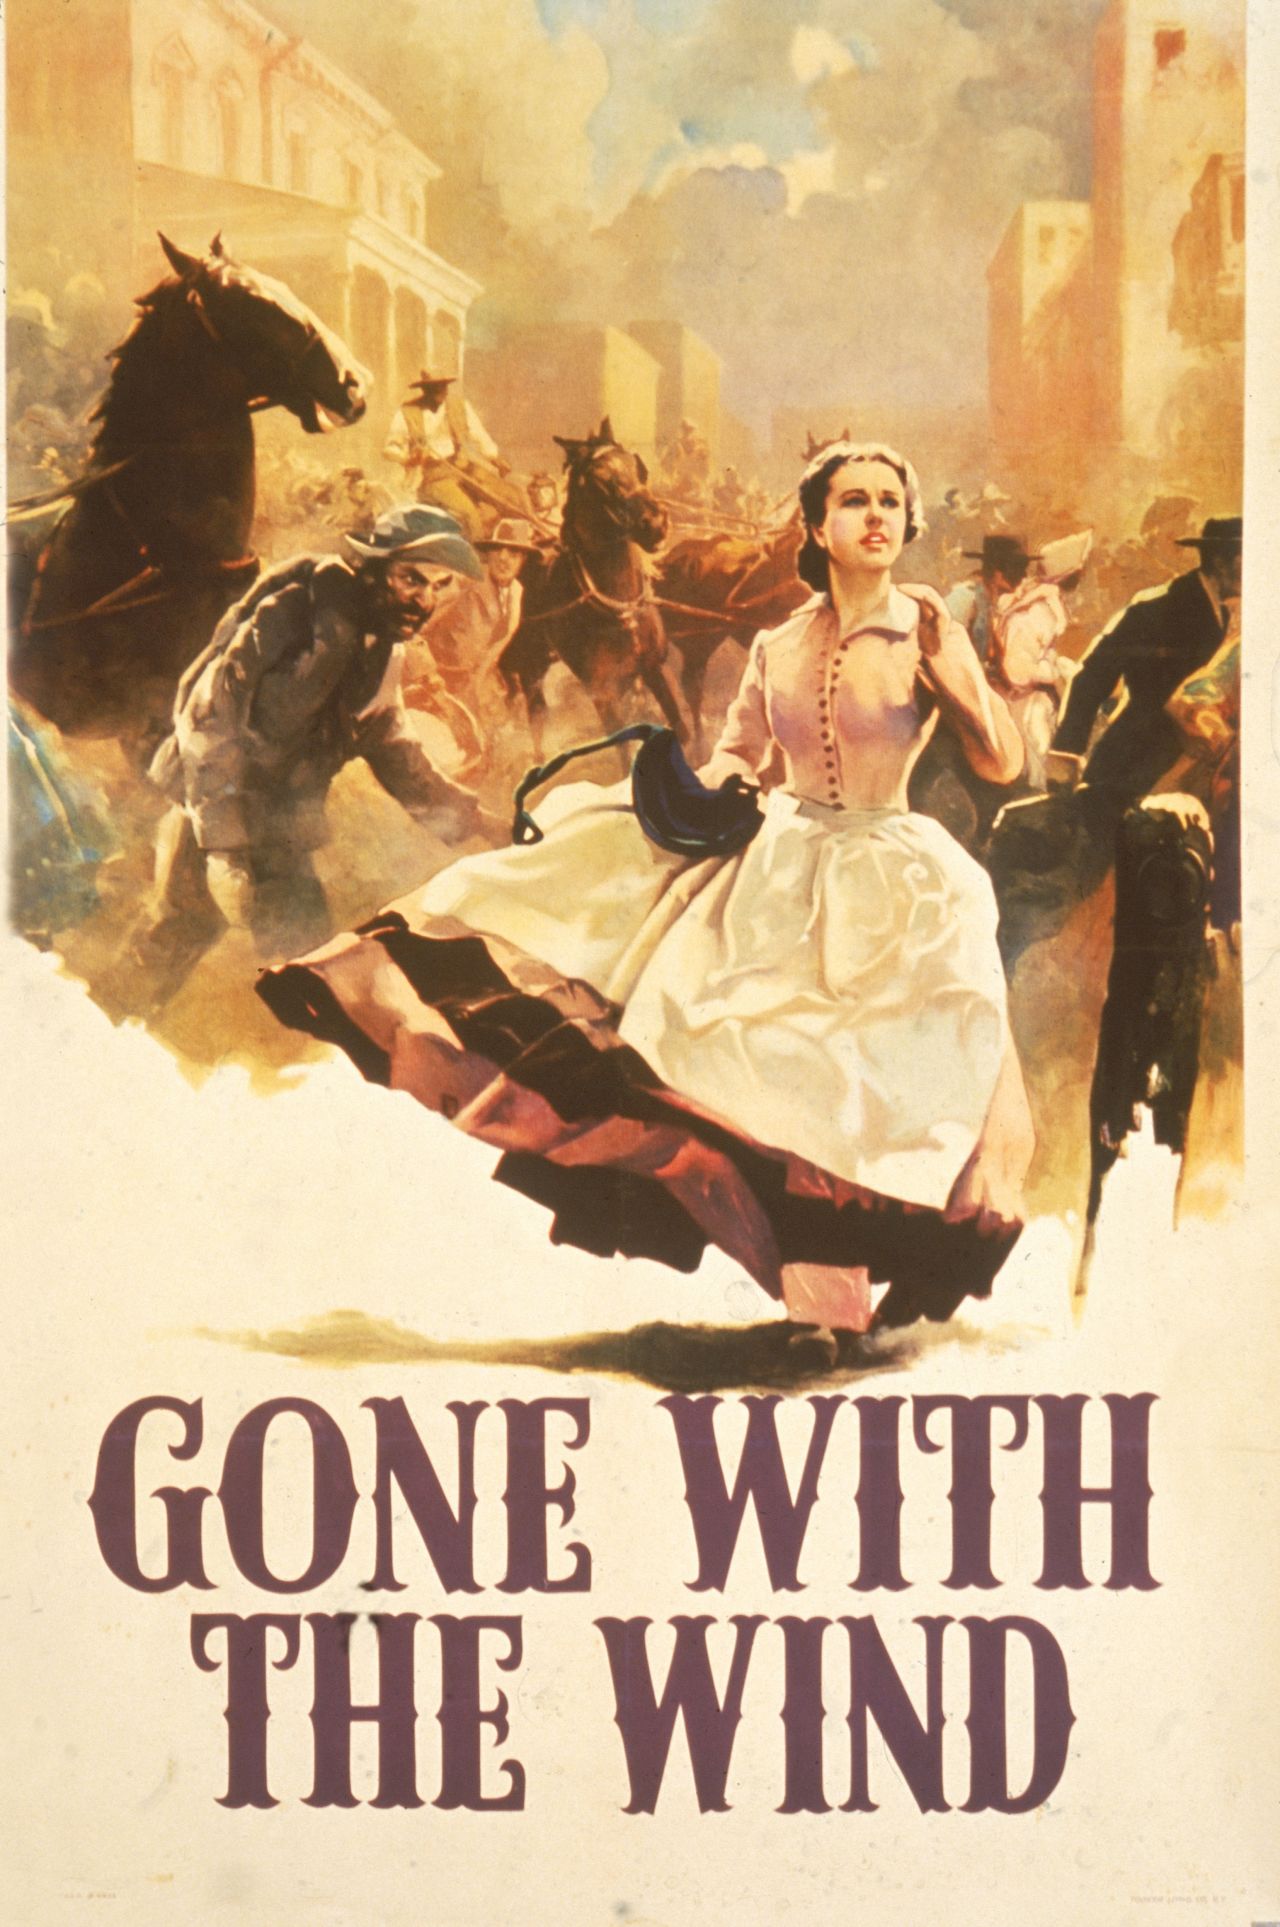 Scarlett O'Hara runs through the street in this promotional poster for the book 'Gone With the Wind,' which is published on June 30, 1936.